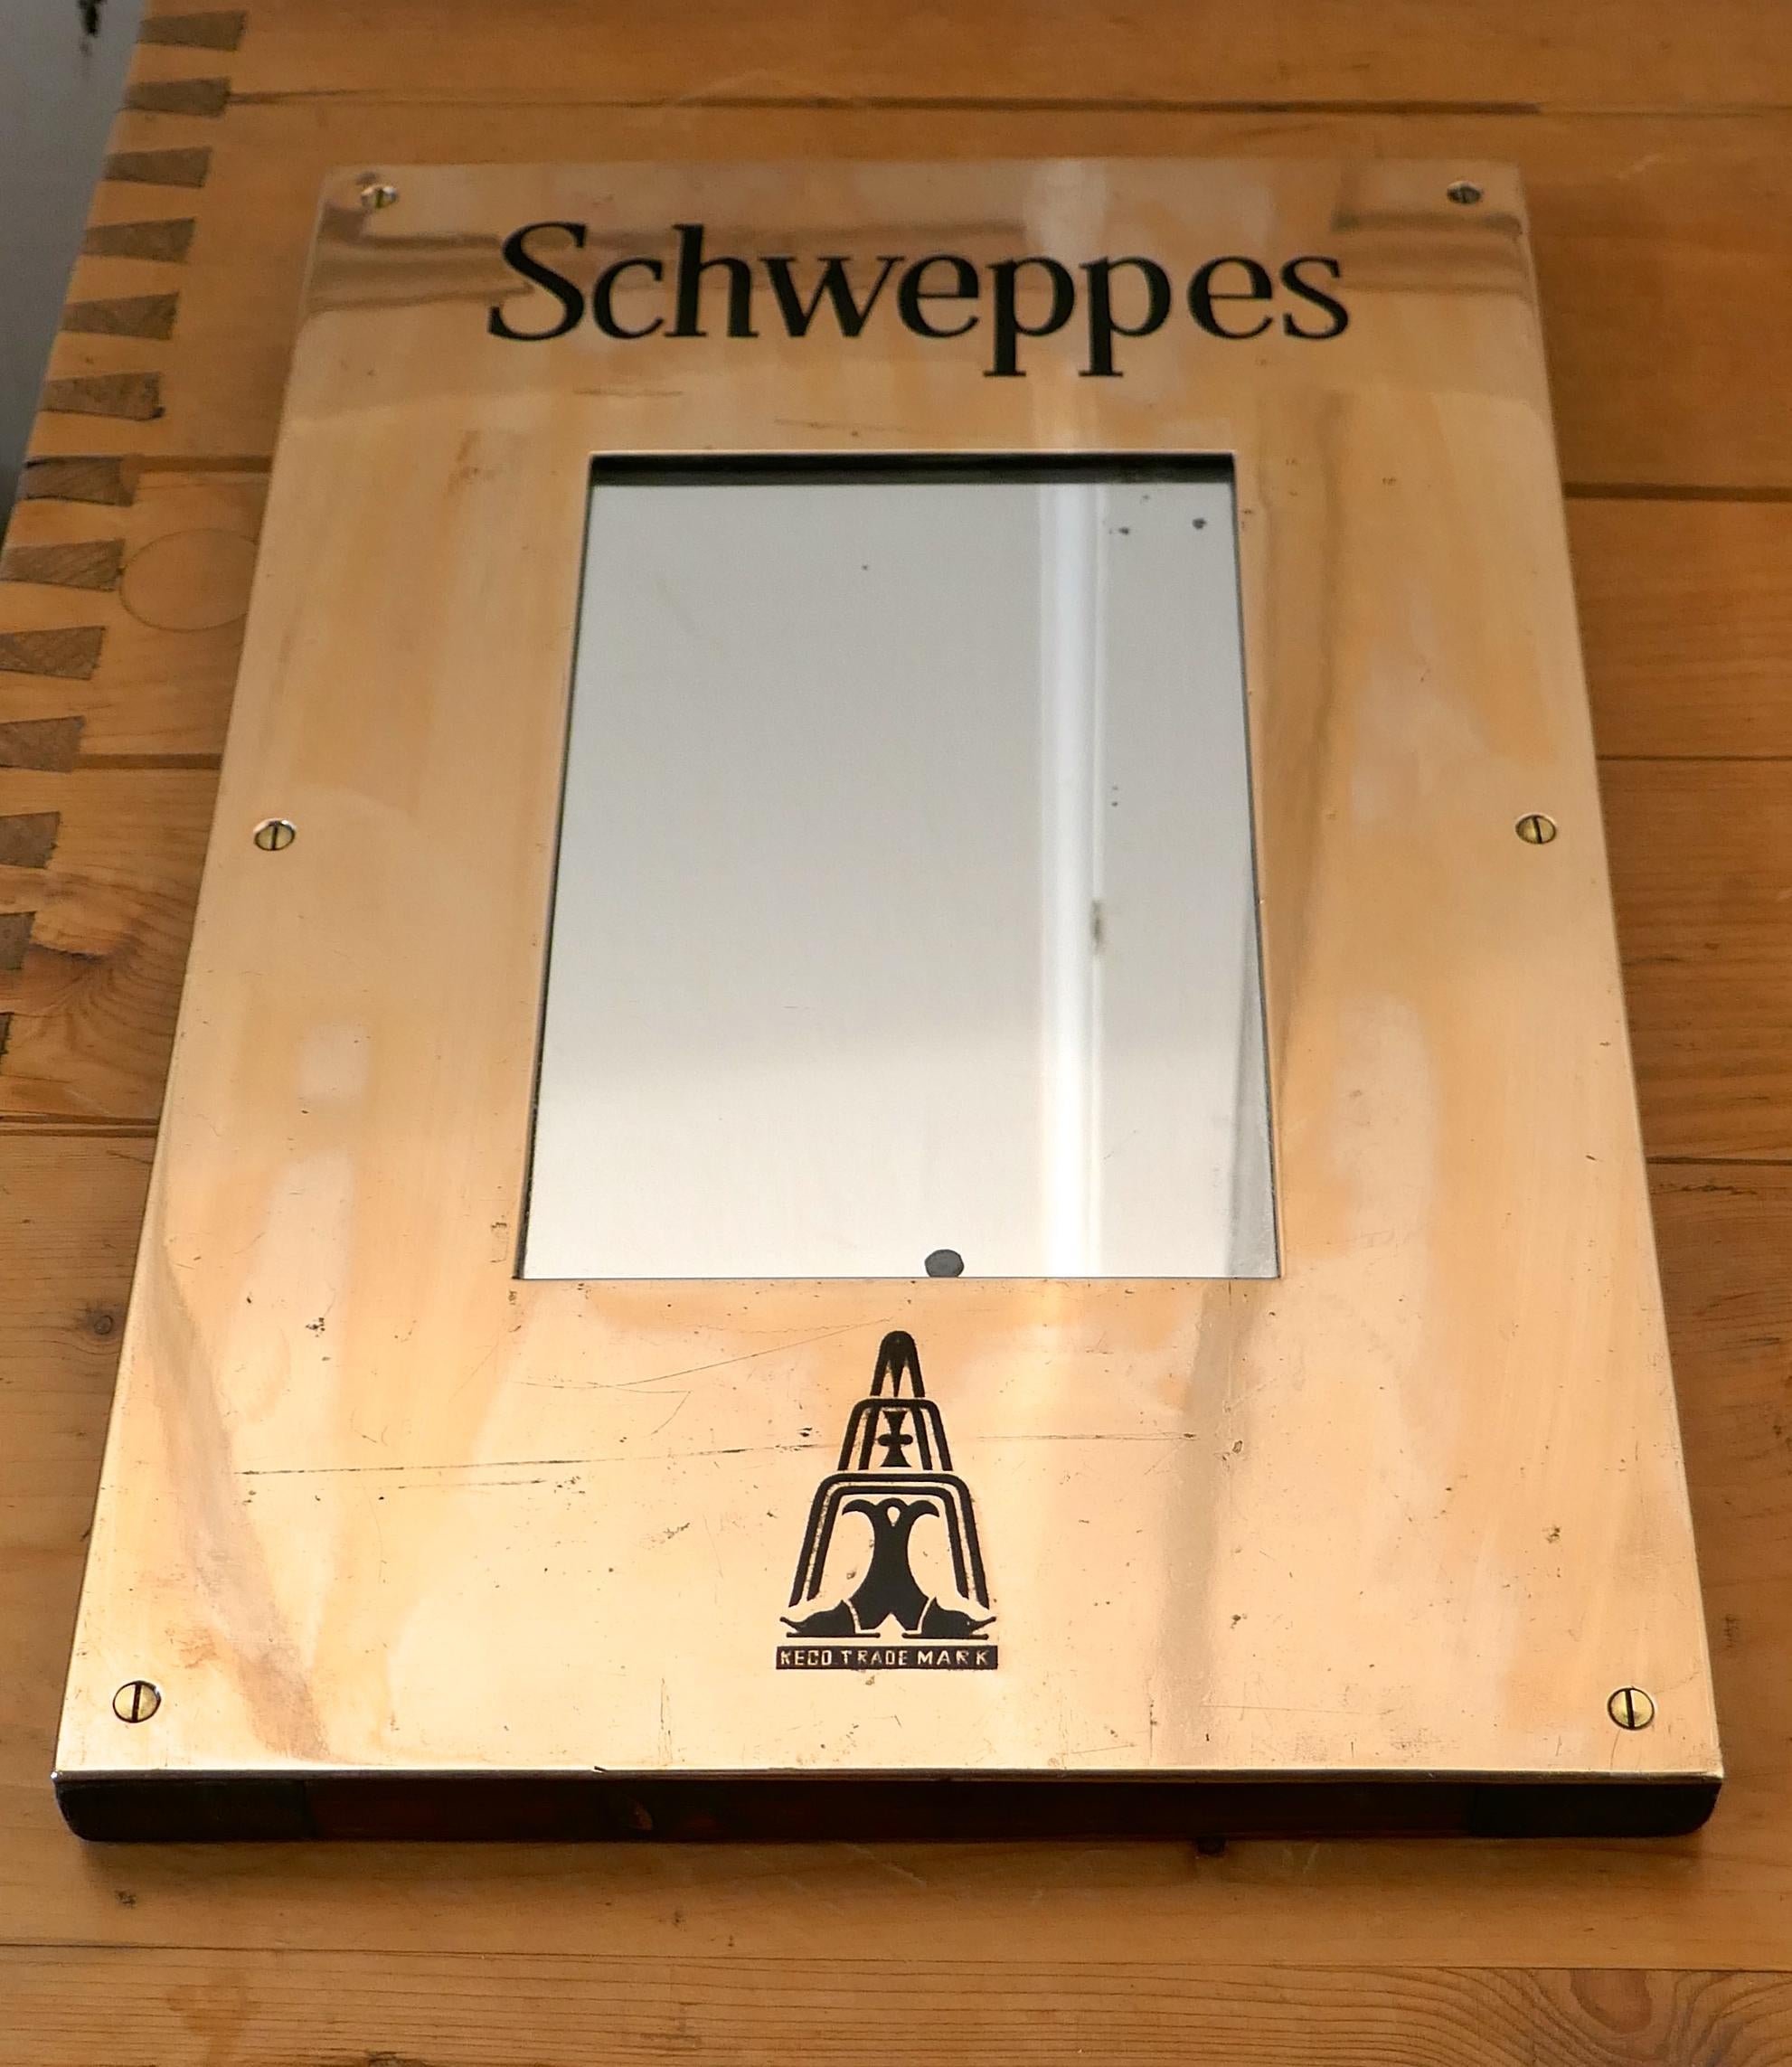 Schweppes brass hotel menu board mirror

An attractive piece of history, this charming brass menu board mirror this would have been hung on the wall at the entrance to the hotel or bar, it has a The Schweppes Logo at the bottom
The brass frame is